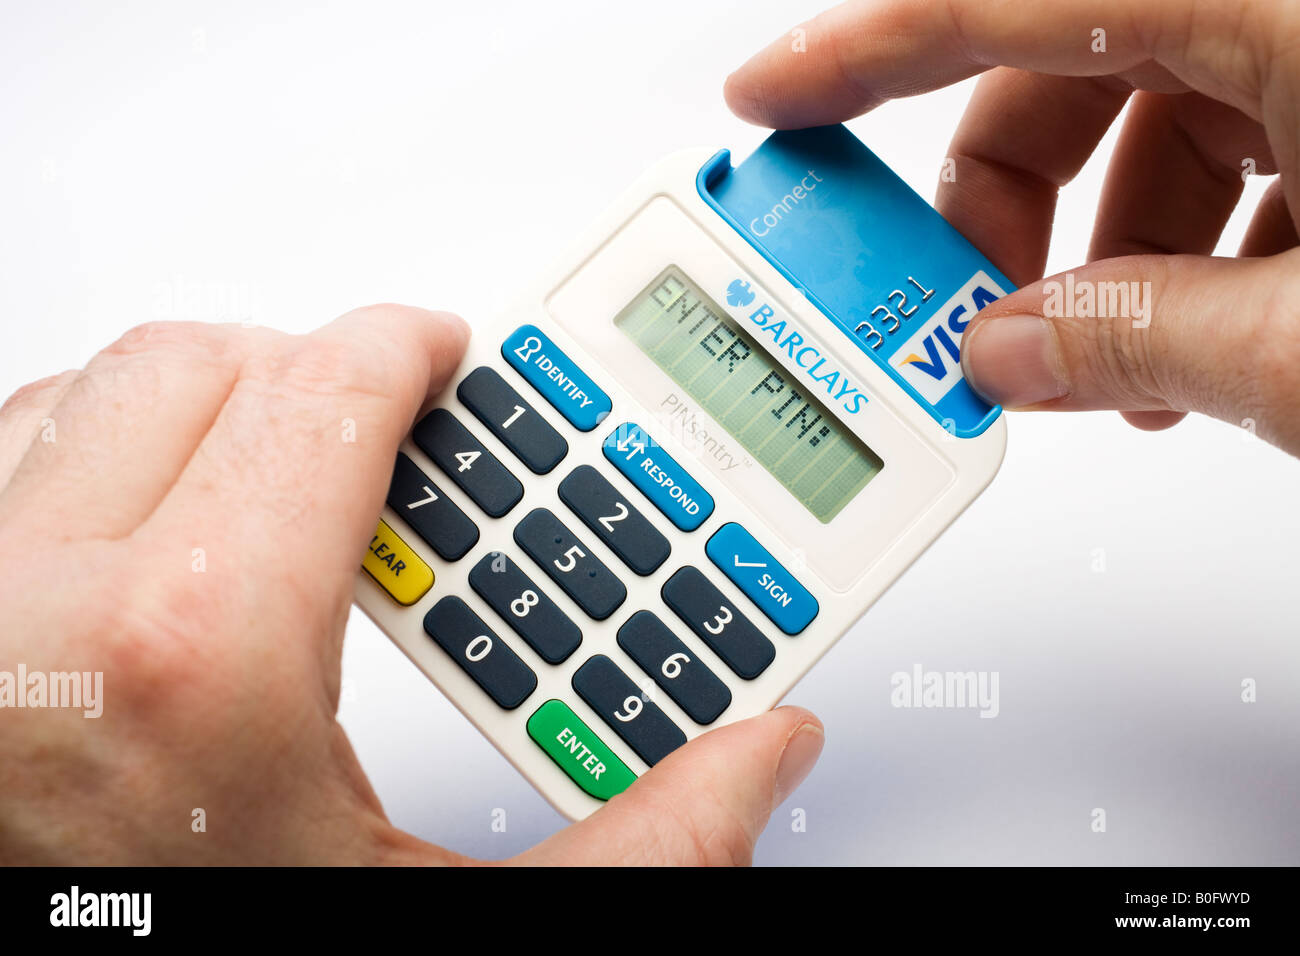 Inserting a debit card into a Barclays Bank Pin Sentry debit card reader Stock Photo